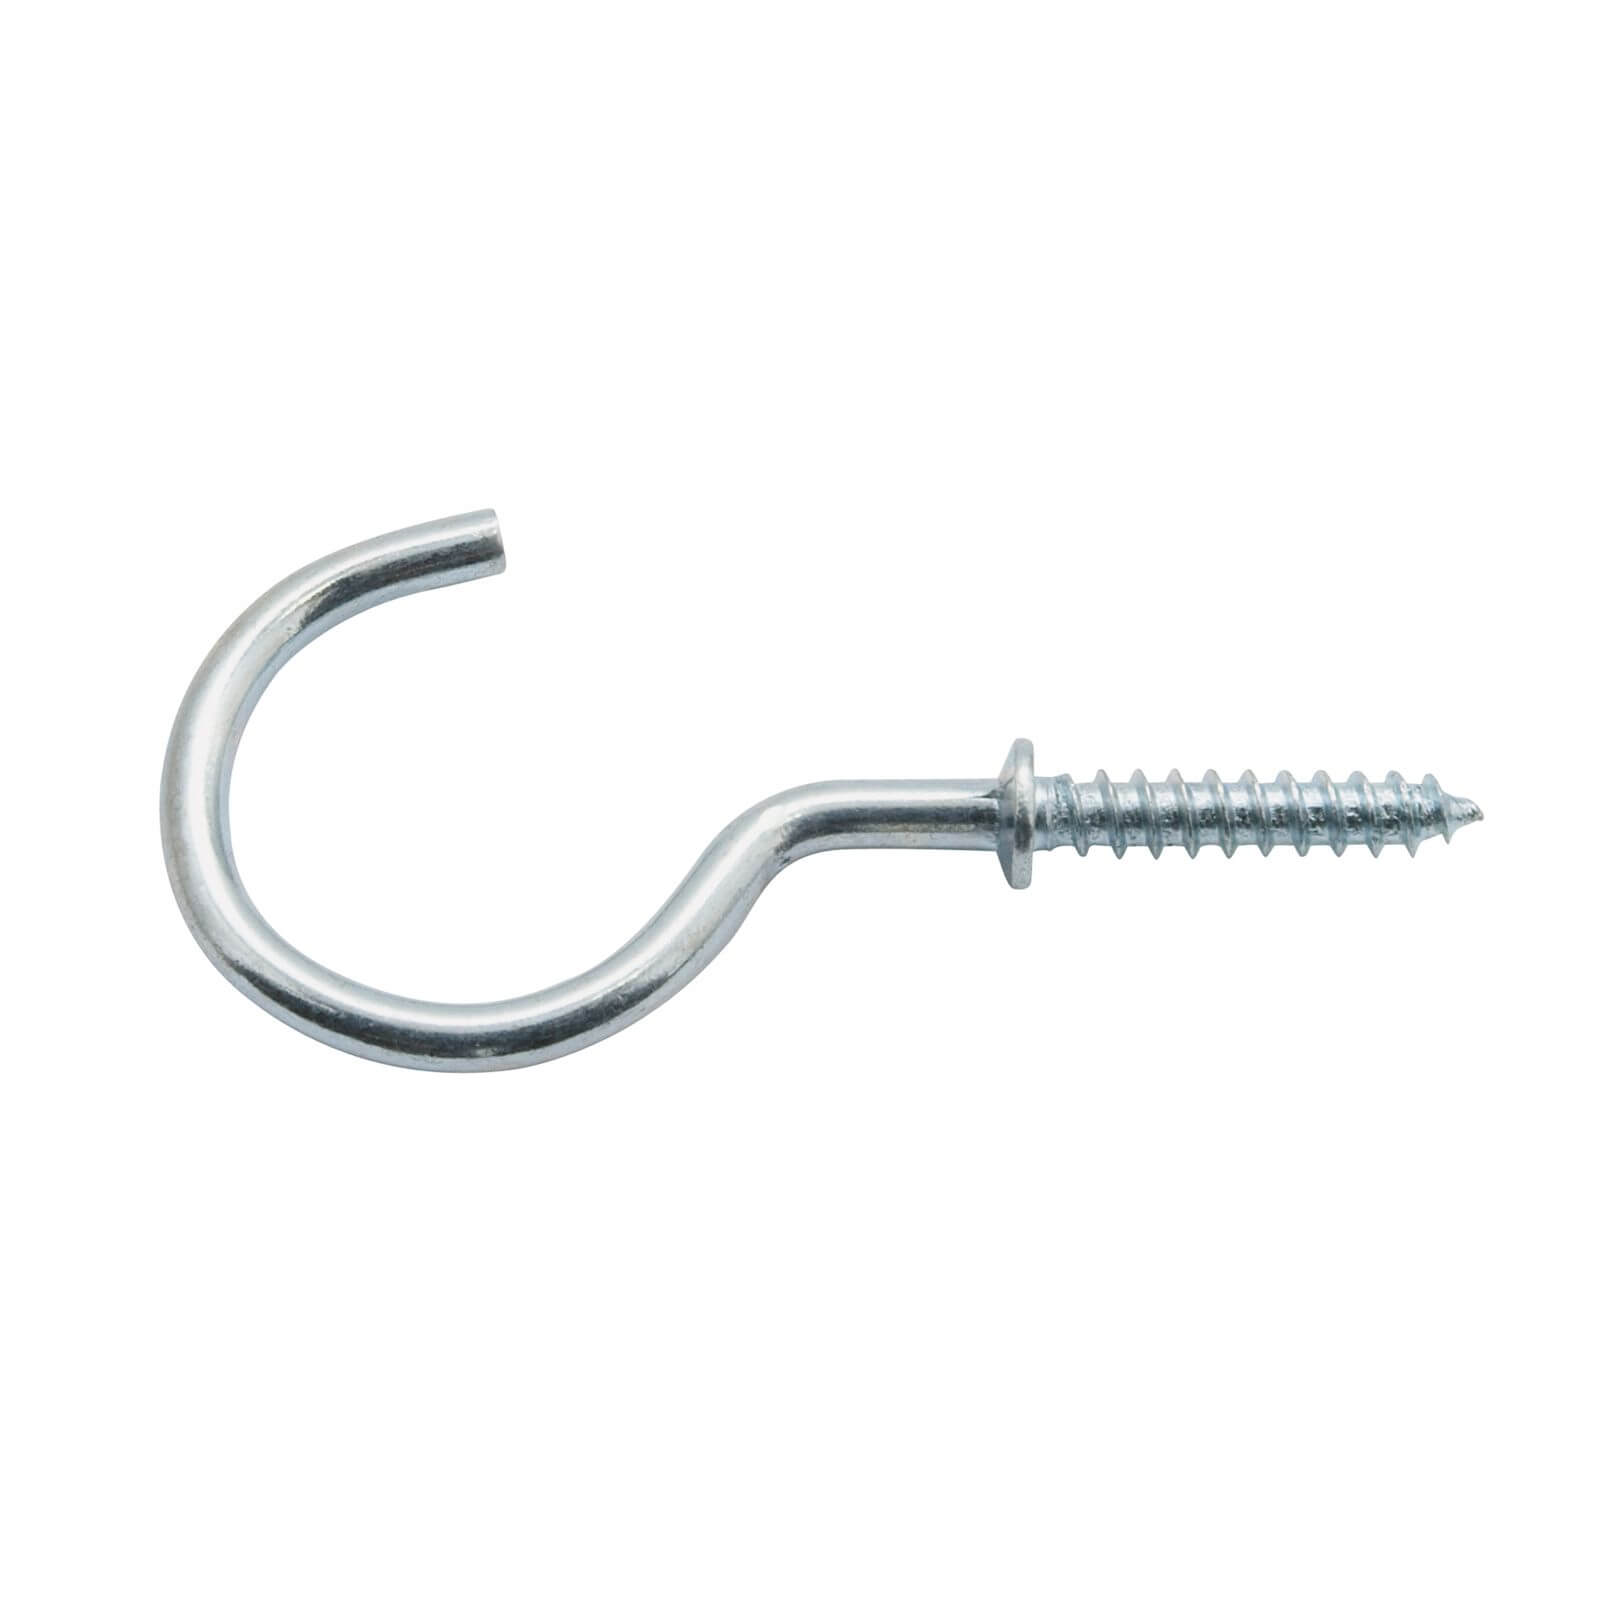 Photo of Round Cup Hook - Zinc Plated - 38mm - 3 Pack